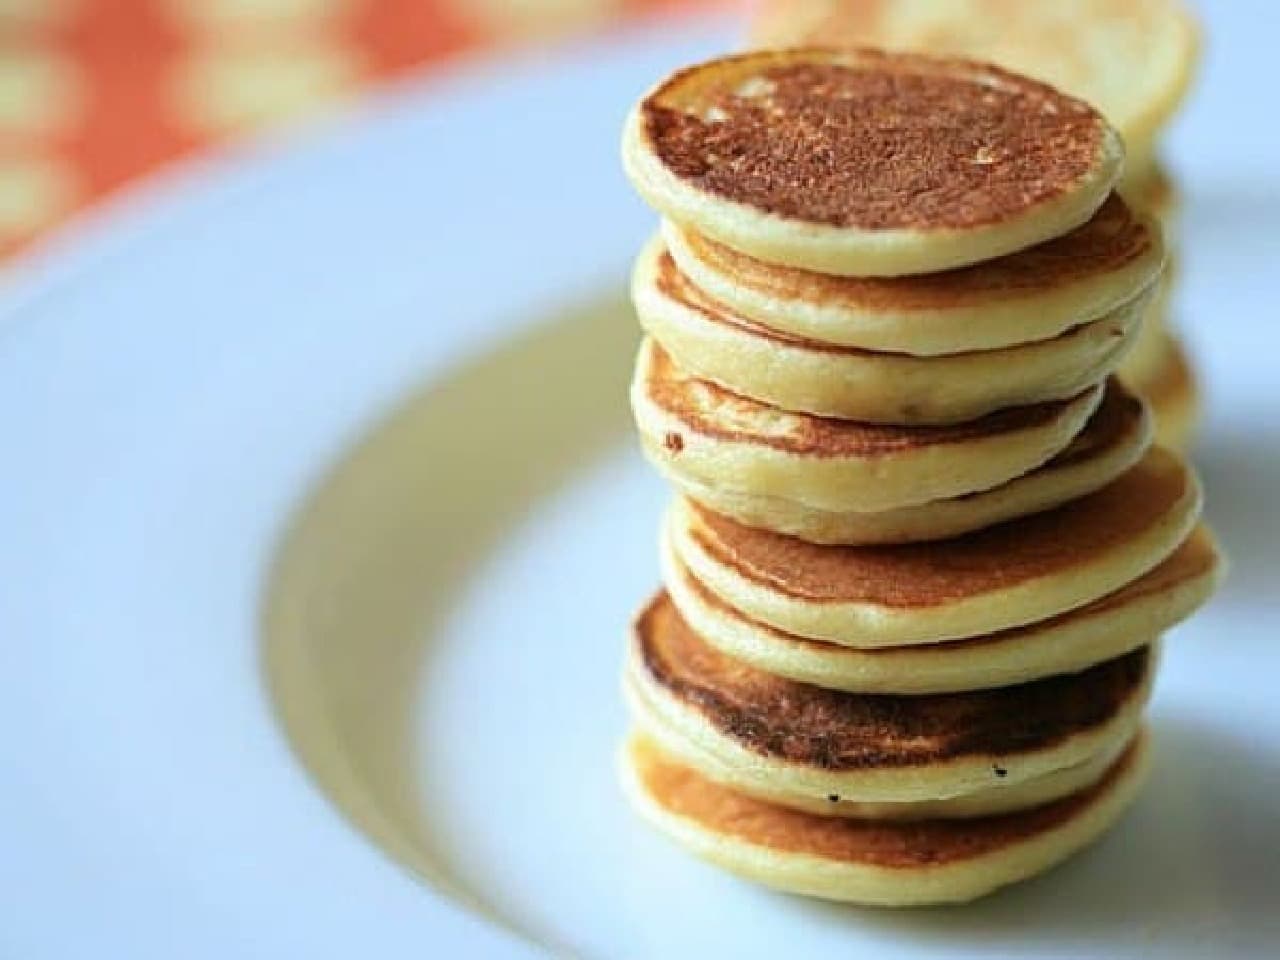 These are 5 cm size mini pancakes.